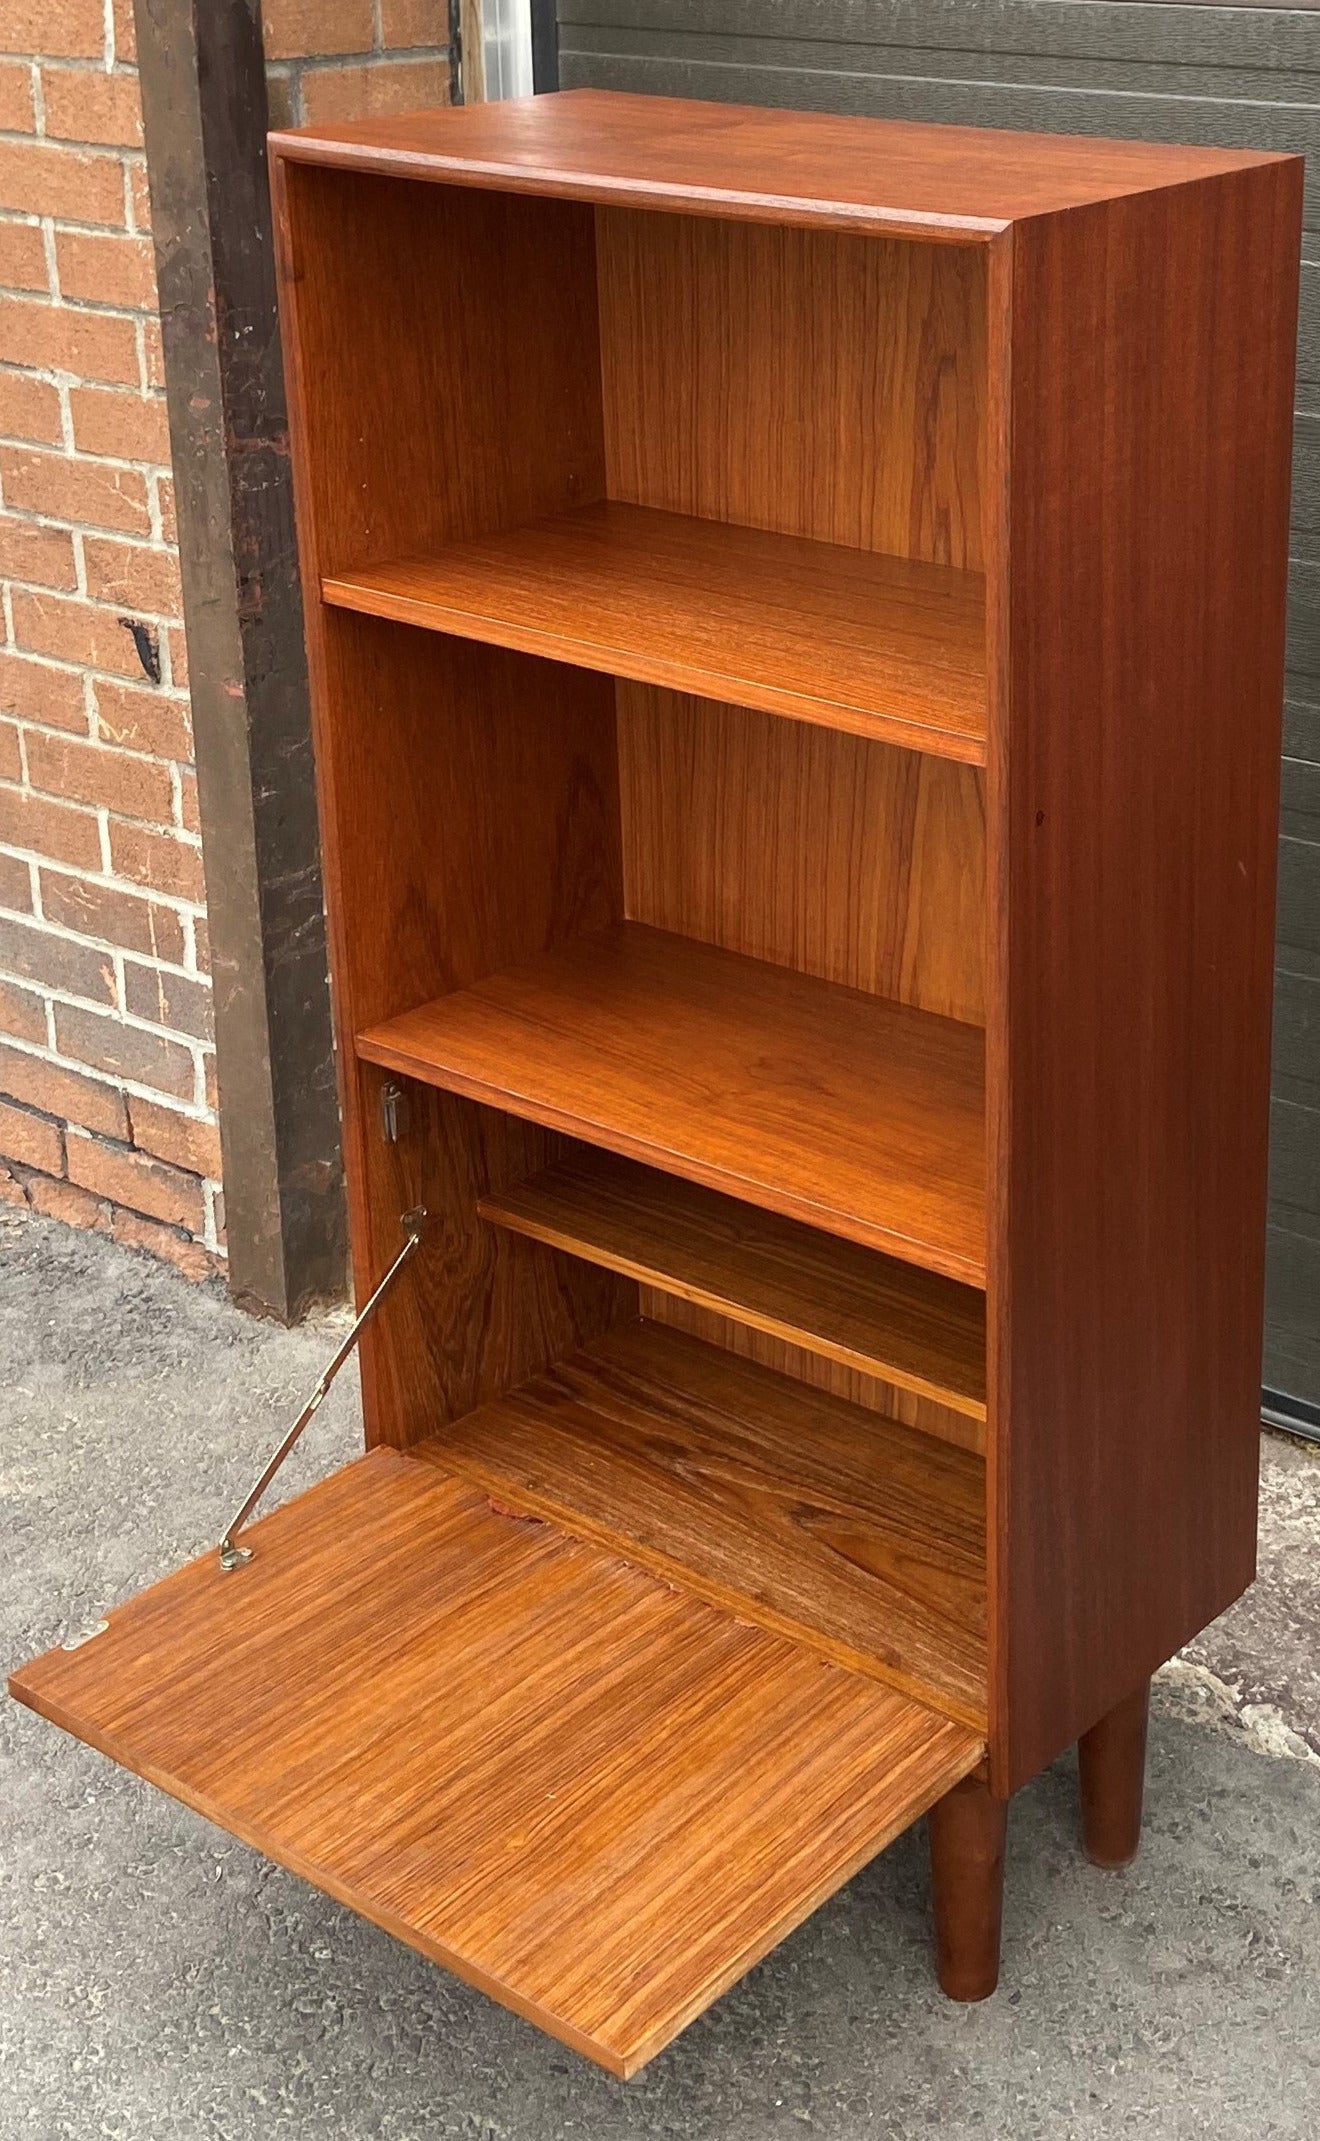 REFINISHED Danish MCM Bar Cabinet, compact